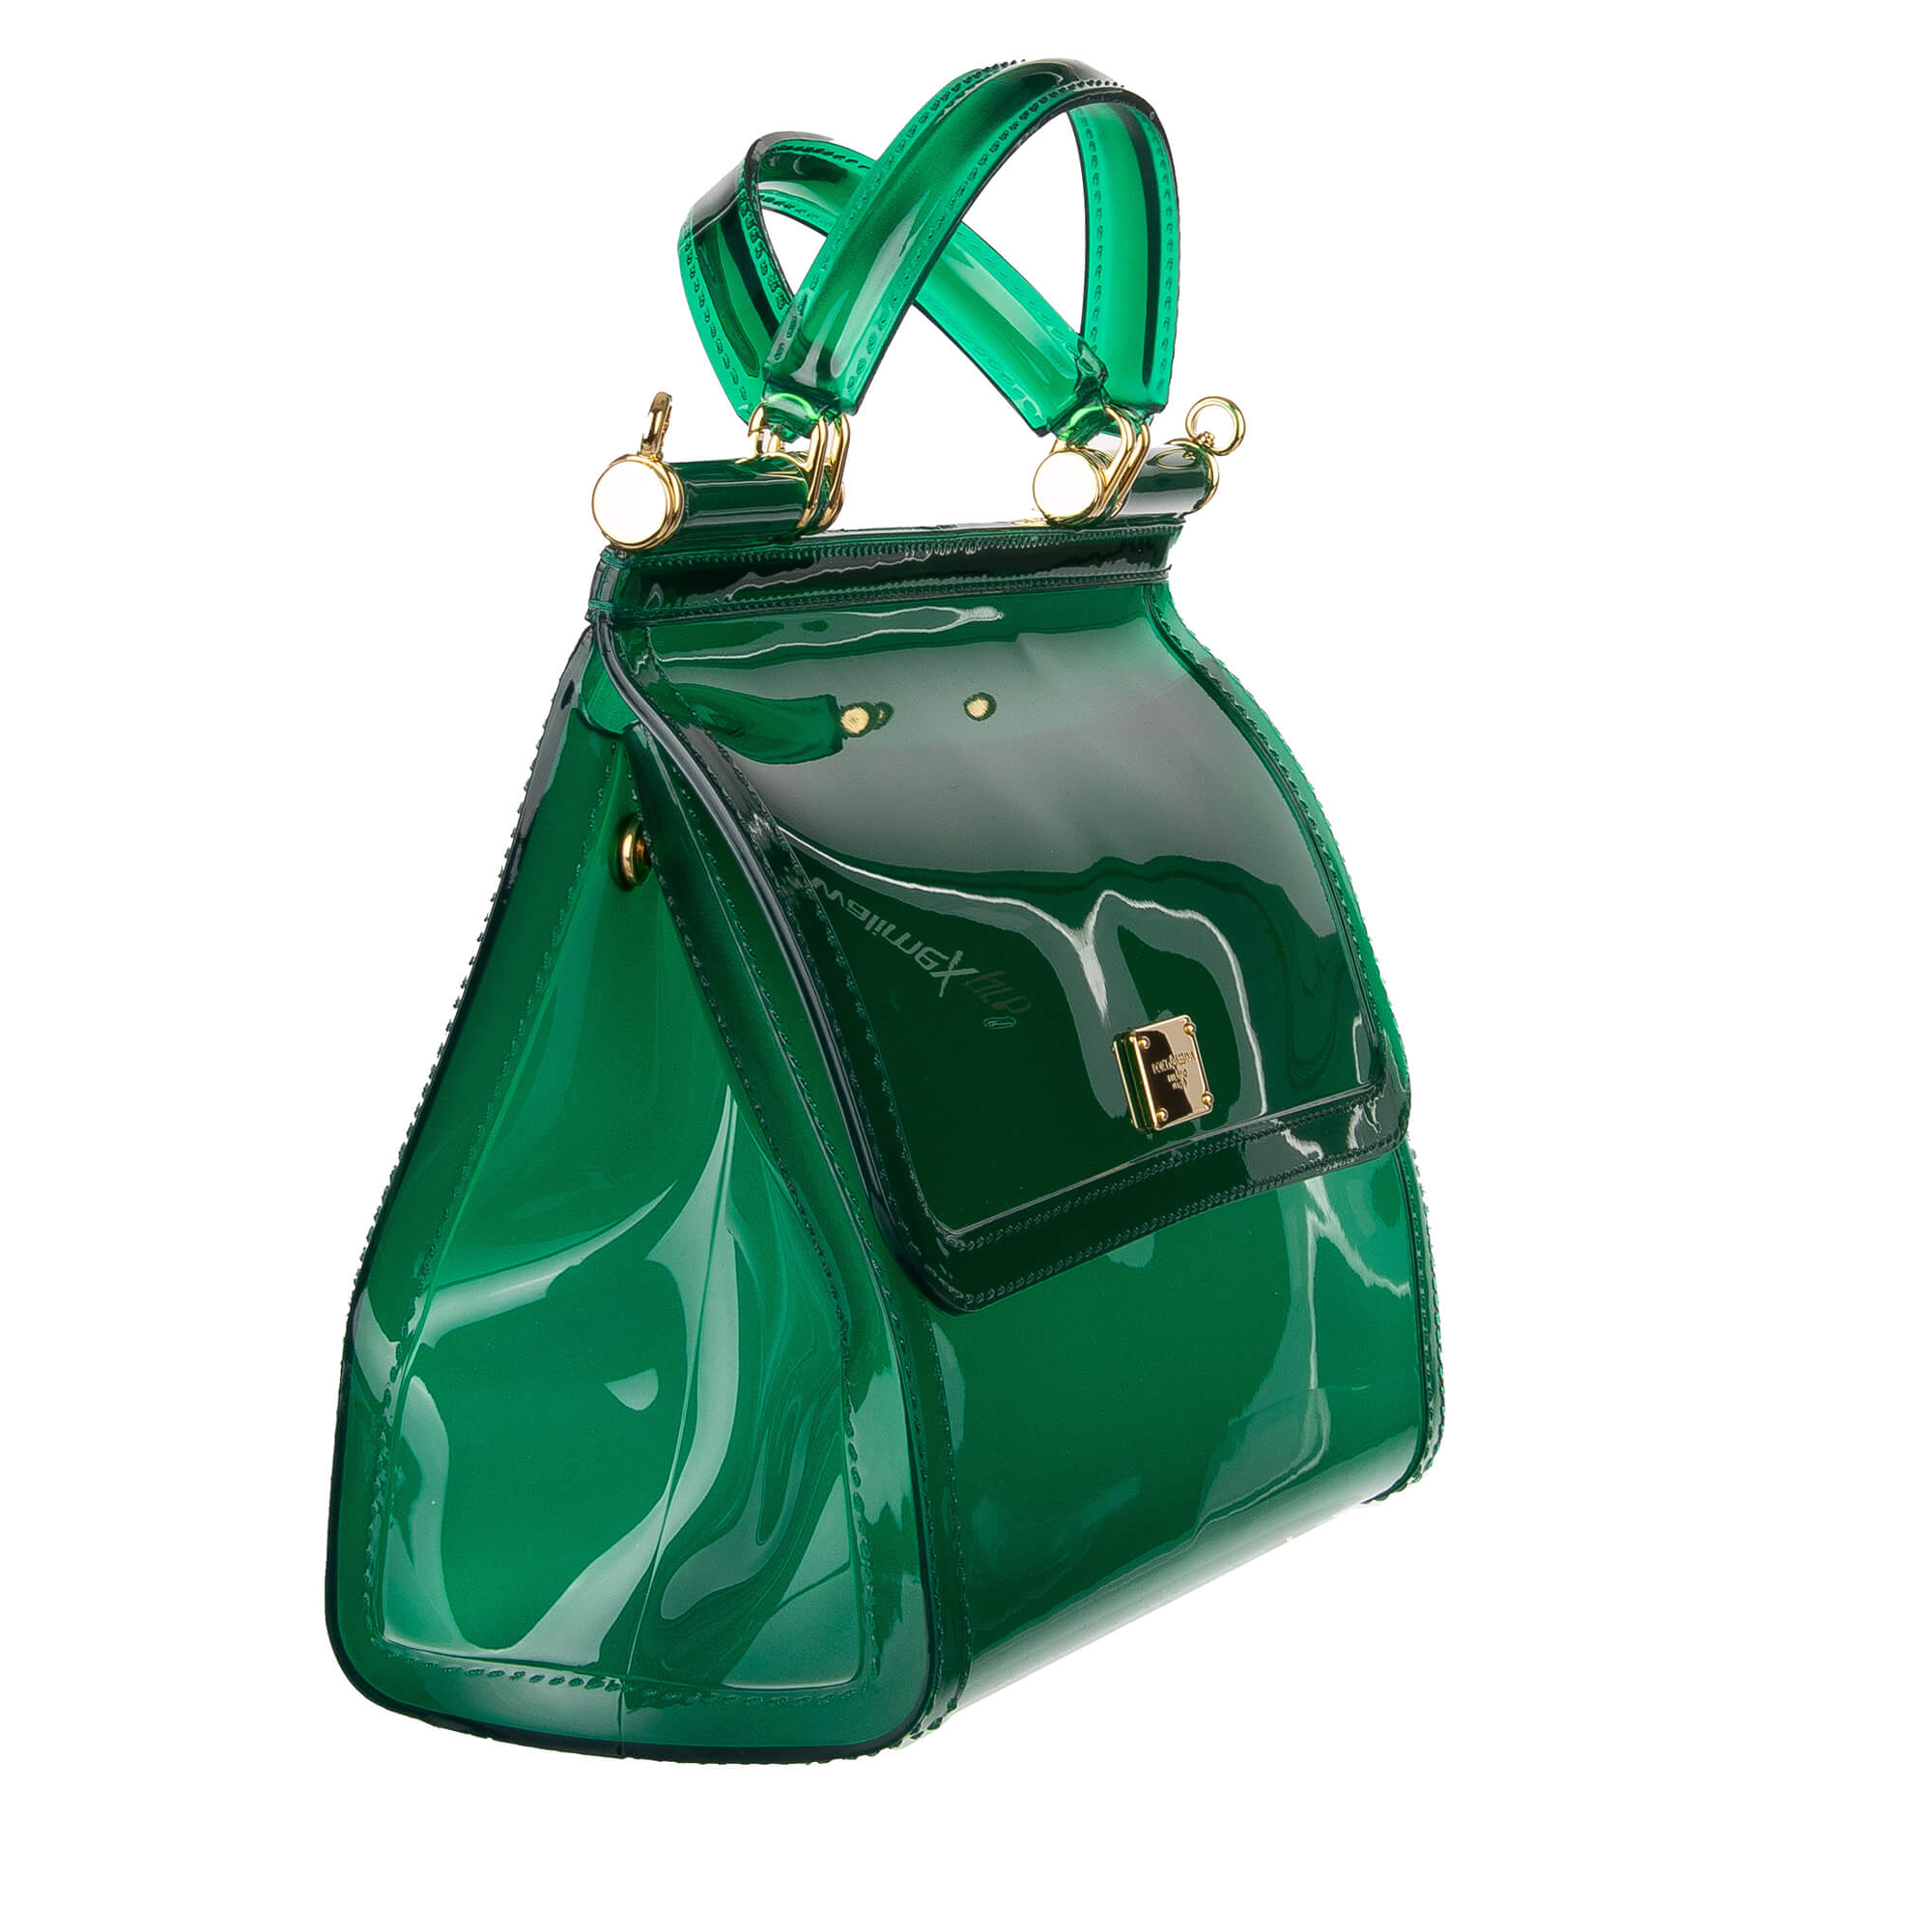 Totes bags Dolce & Gabbana - Sicily small bag in emerald green color -  BB6003A100187174